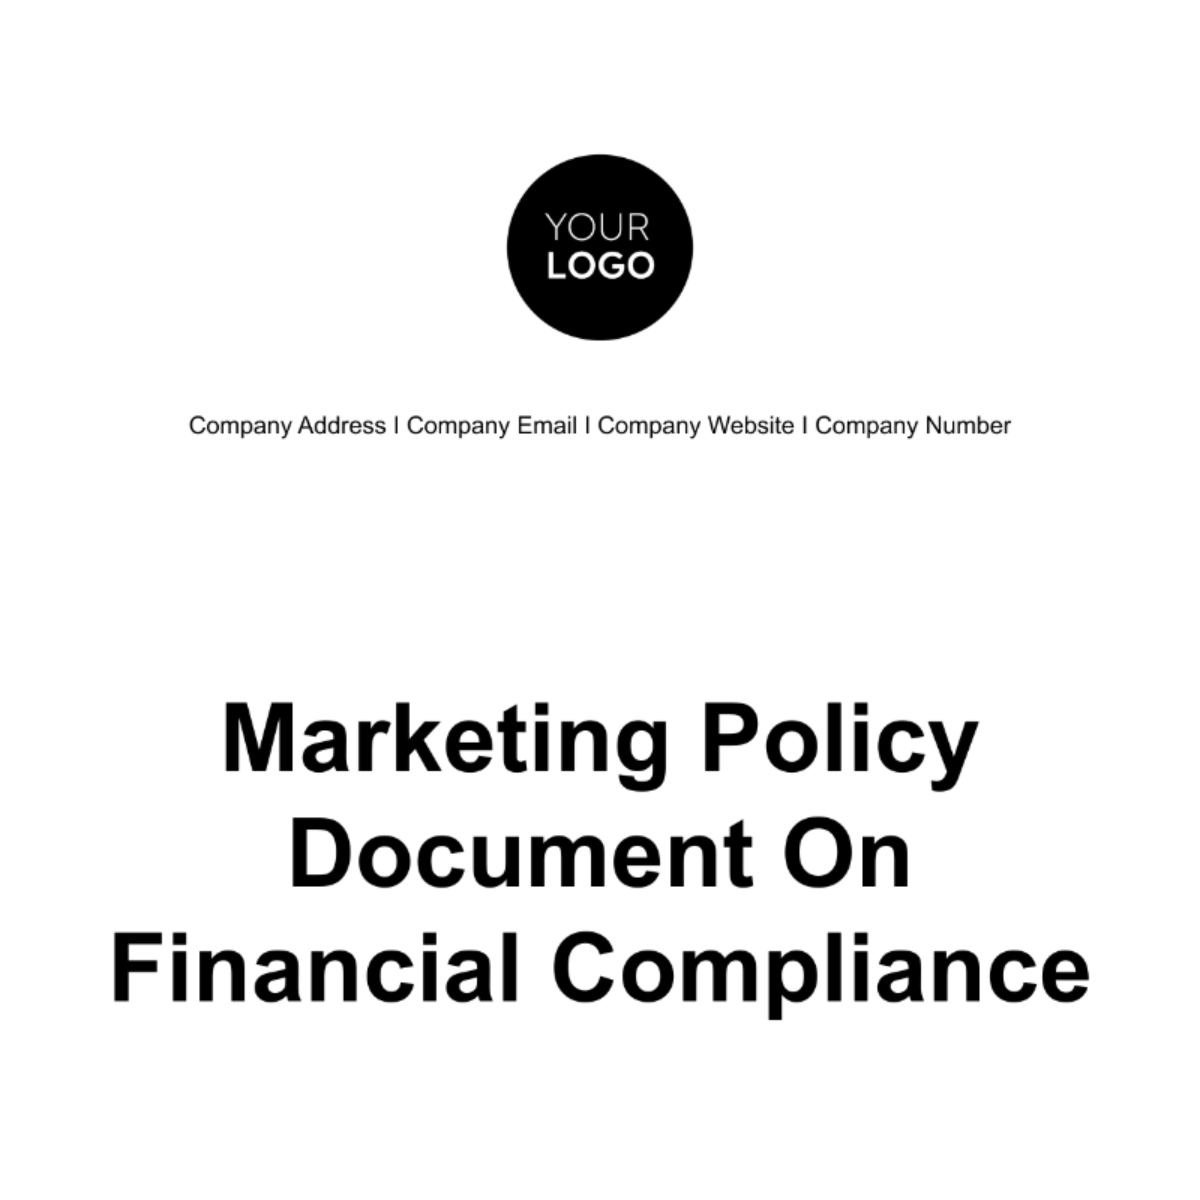 Marketing Policy Document on Financial Compliance Template